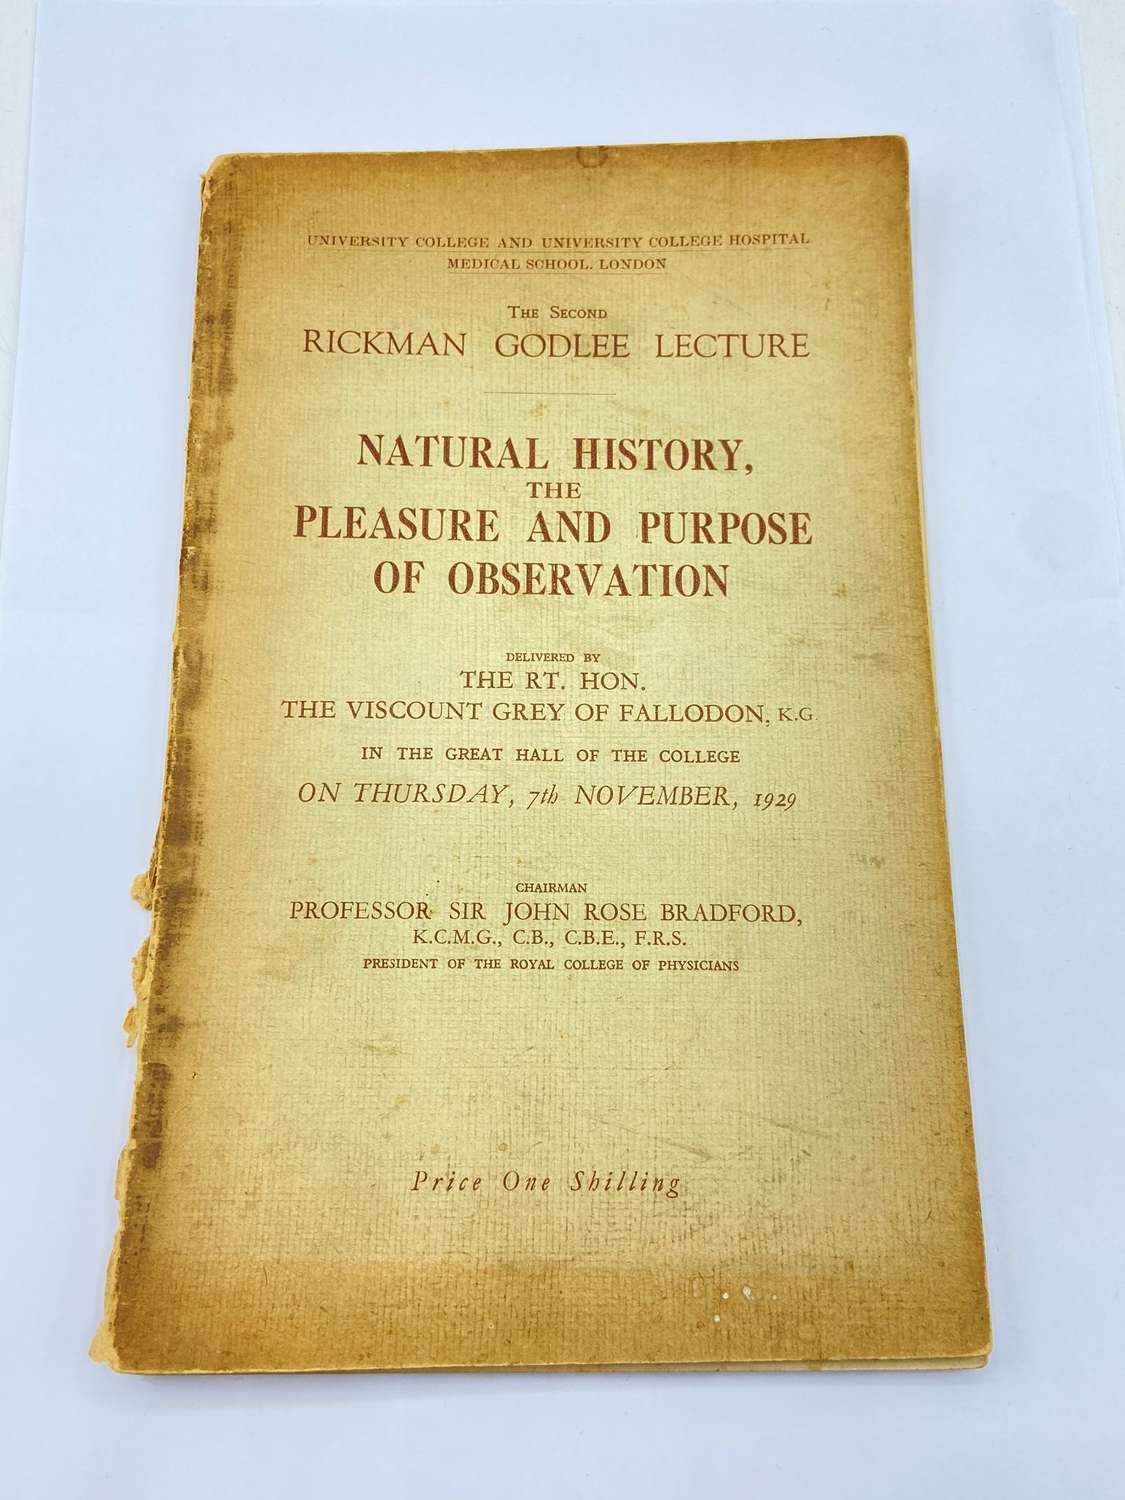 1929 Natural History, Pleasure & Purpose Of Observation Publication